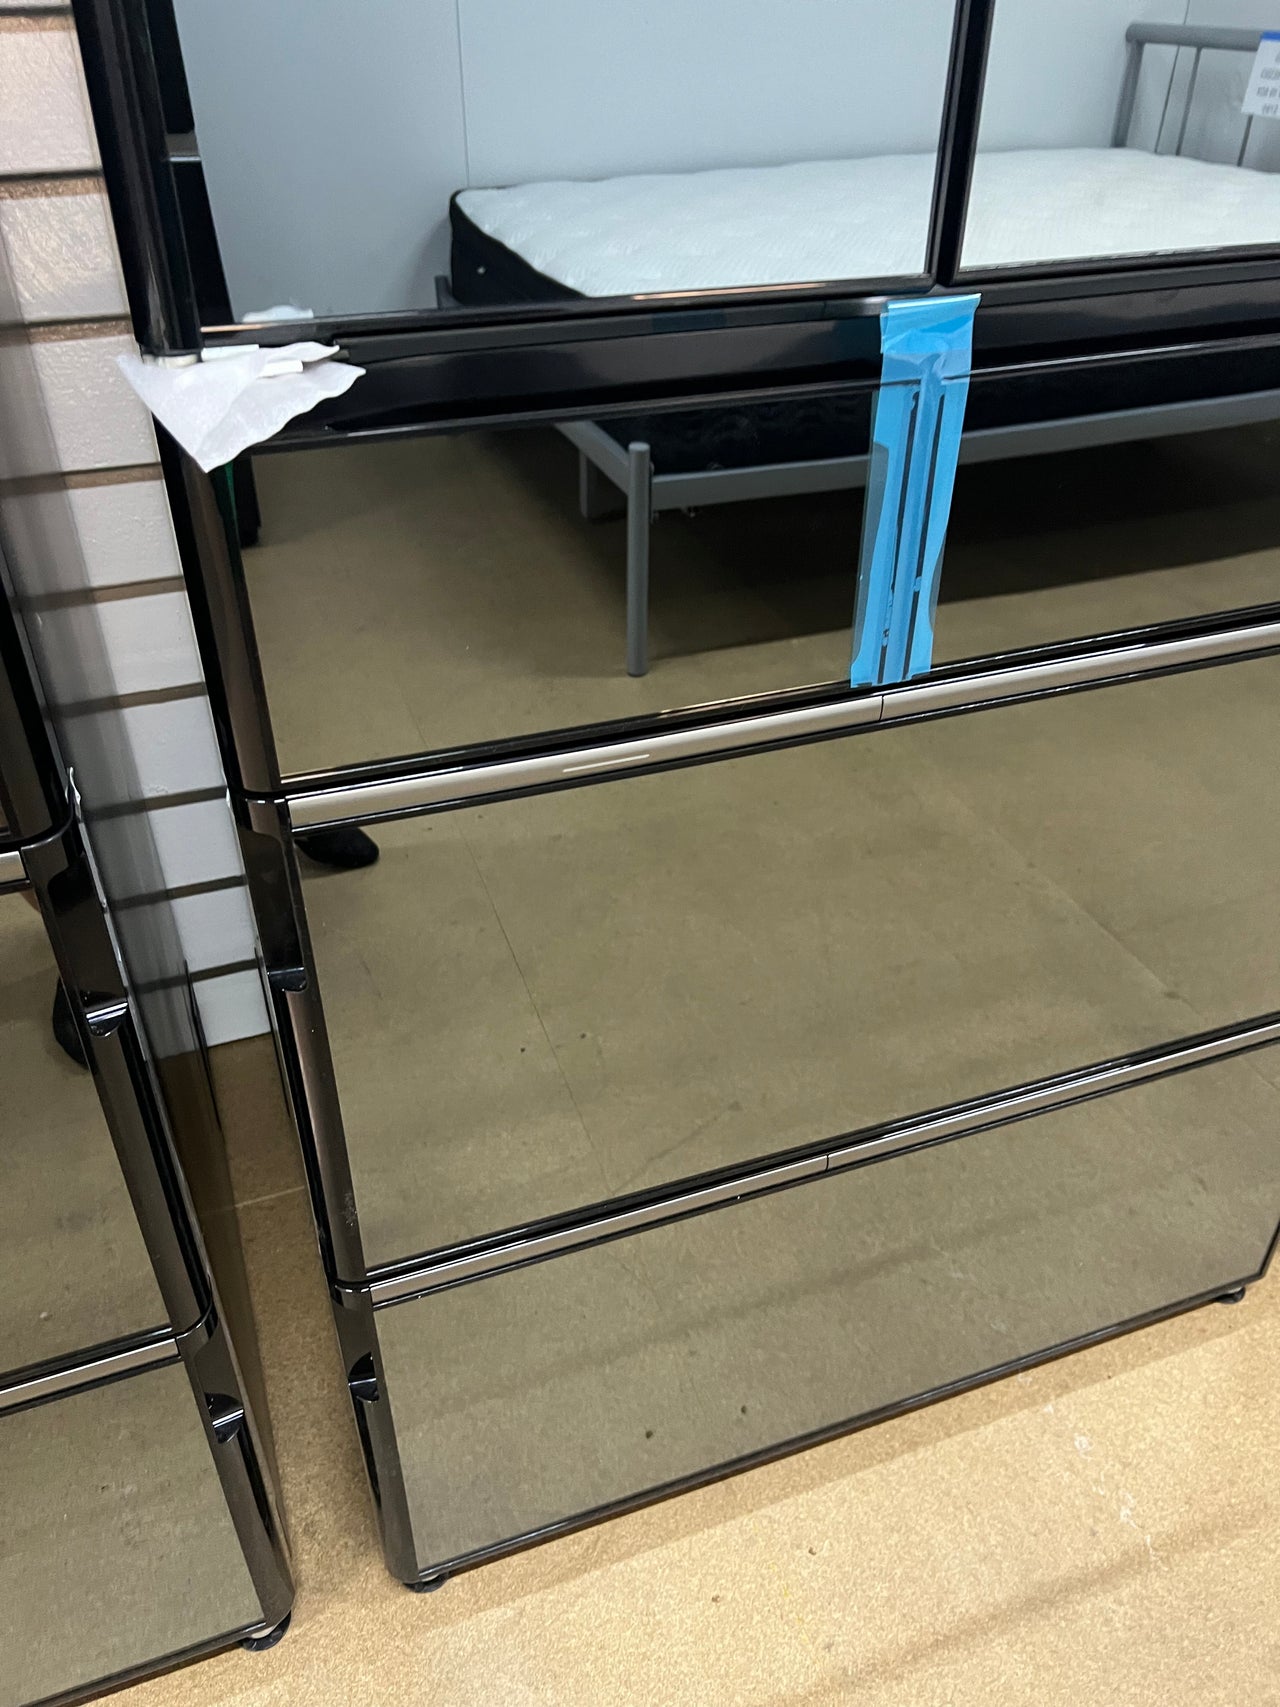 Factory second/Carton damaged 735Ltr Mirror Glass finish with 4 STAR Energy Star Rating RZX740RAX - Second Hand Appliances Geebung